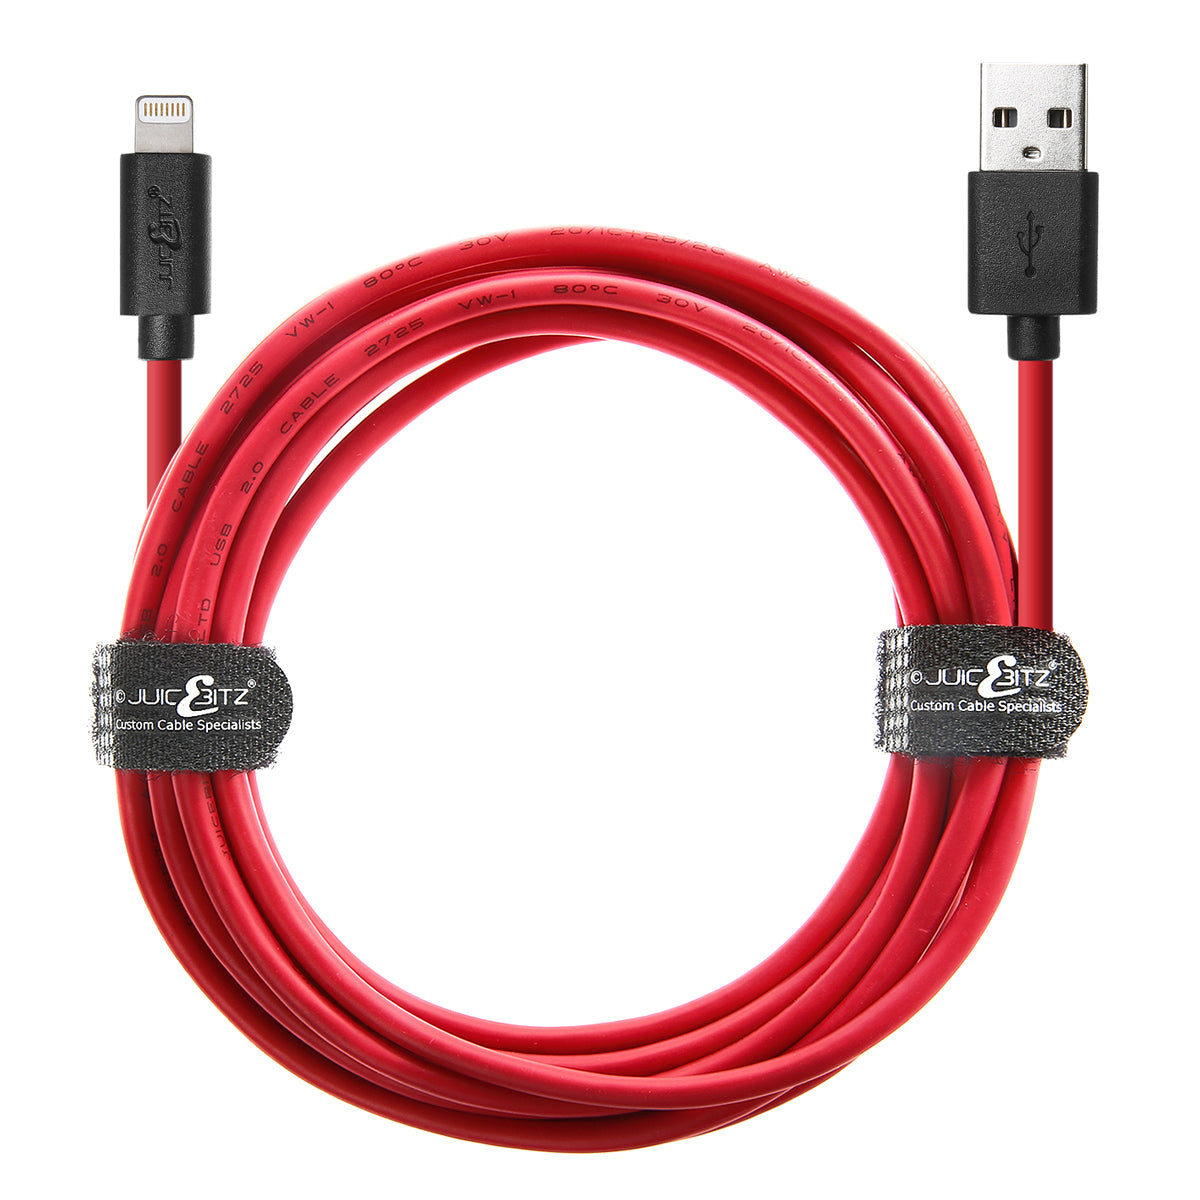 USB Charger Cable Data Sync Lead for iPhone, iPad, iPod - Red